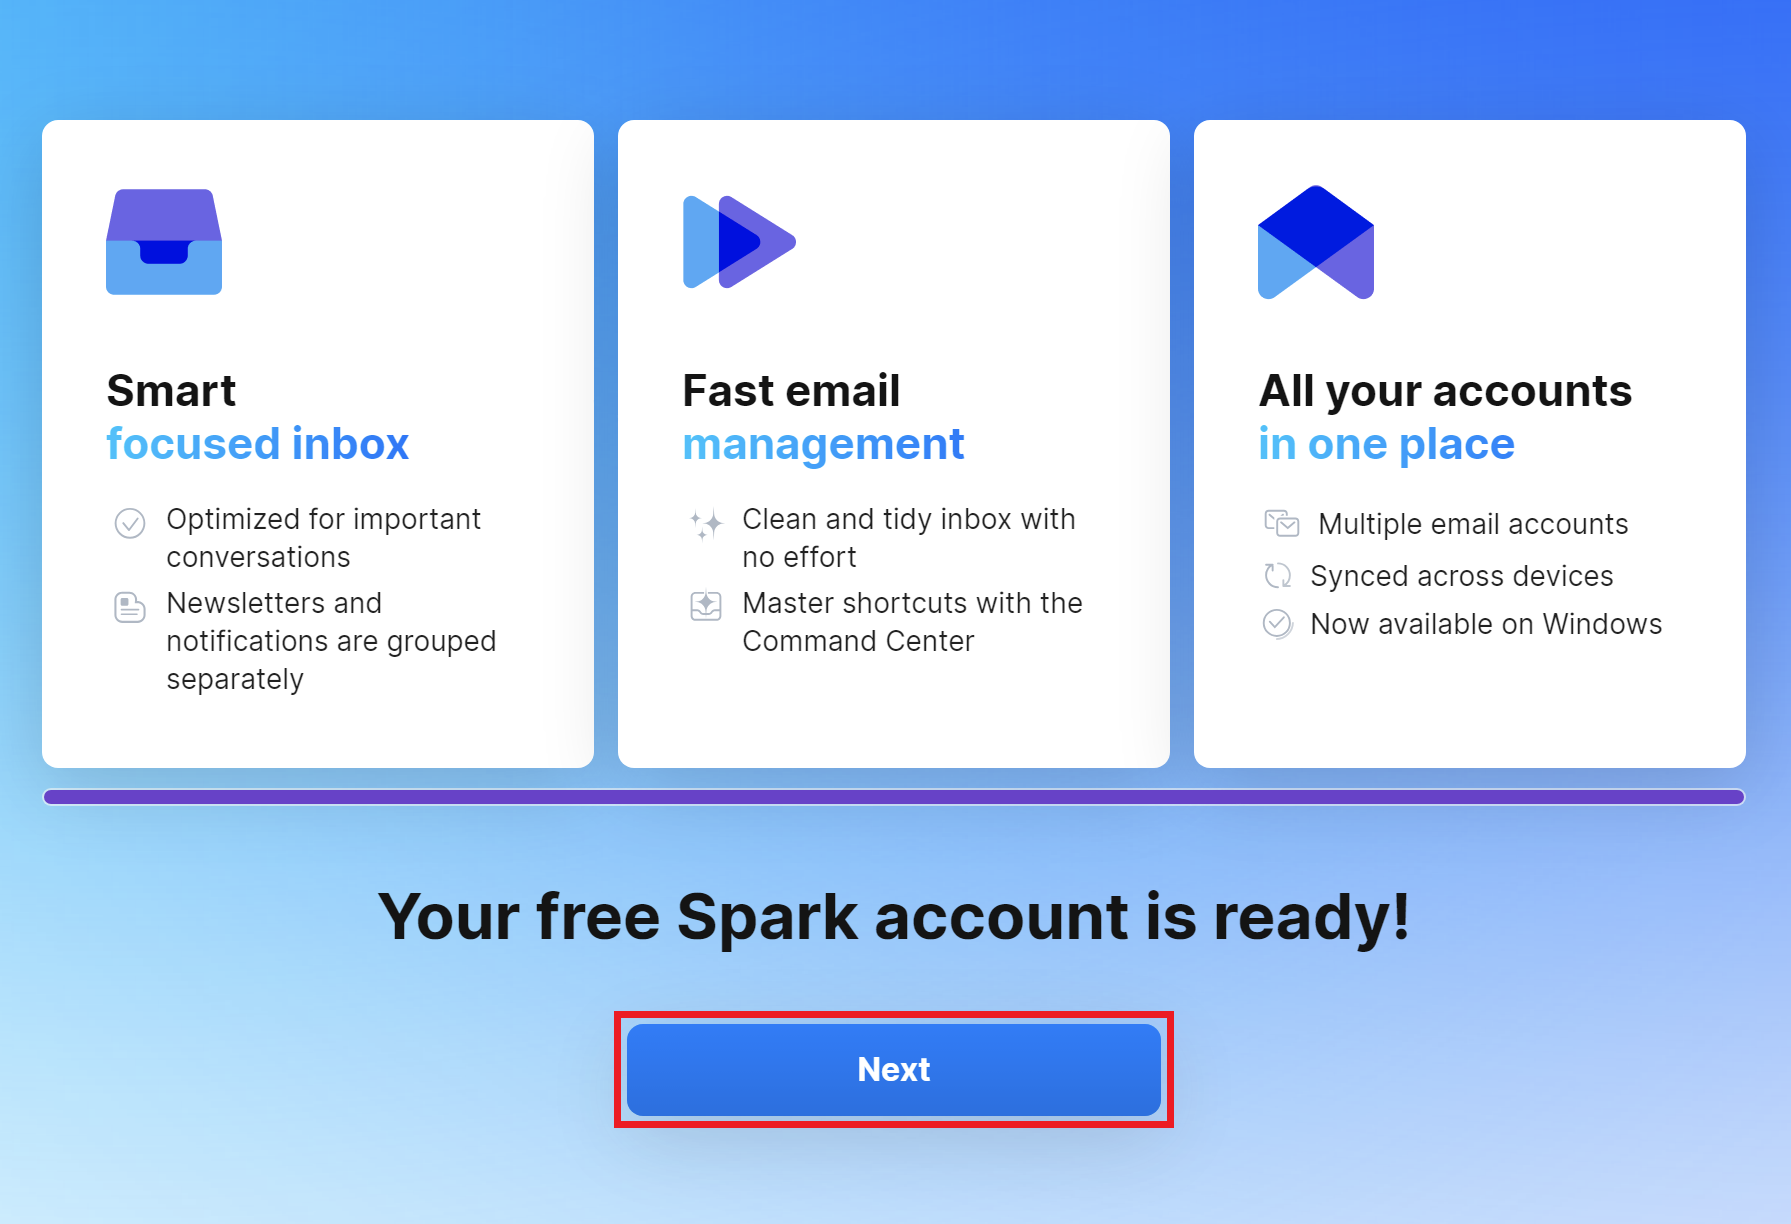 Sparks - Windows - Account is ready - Next.png